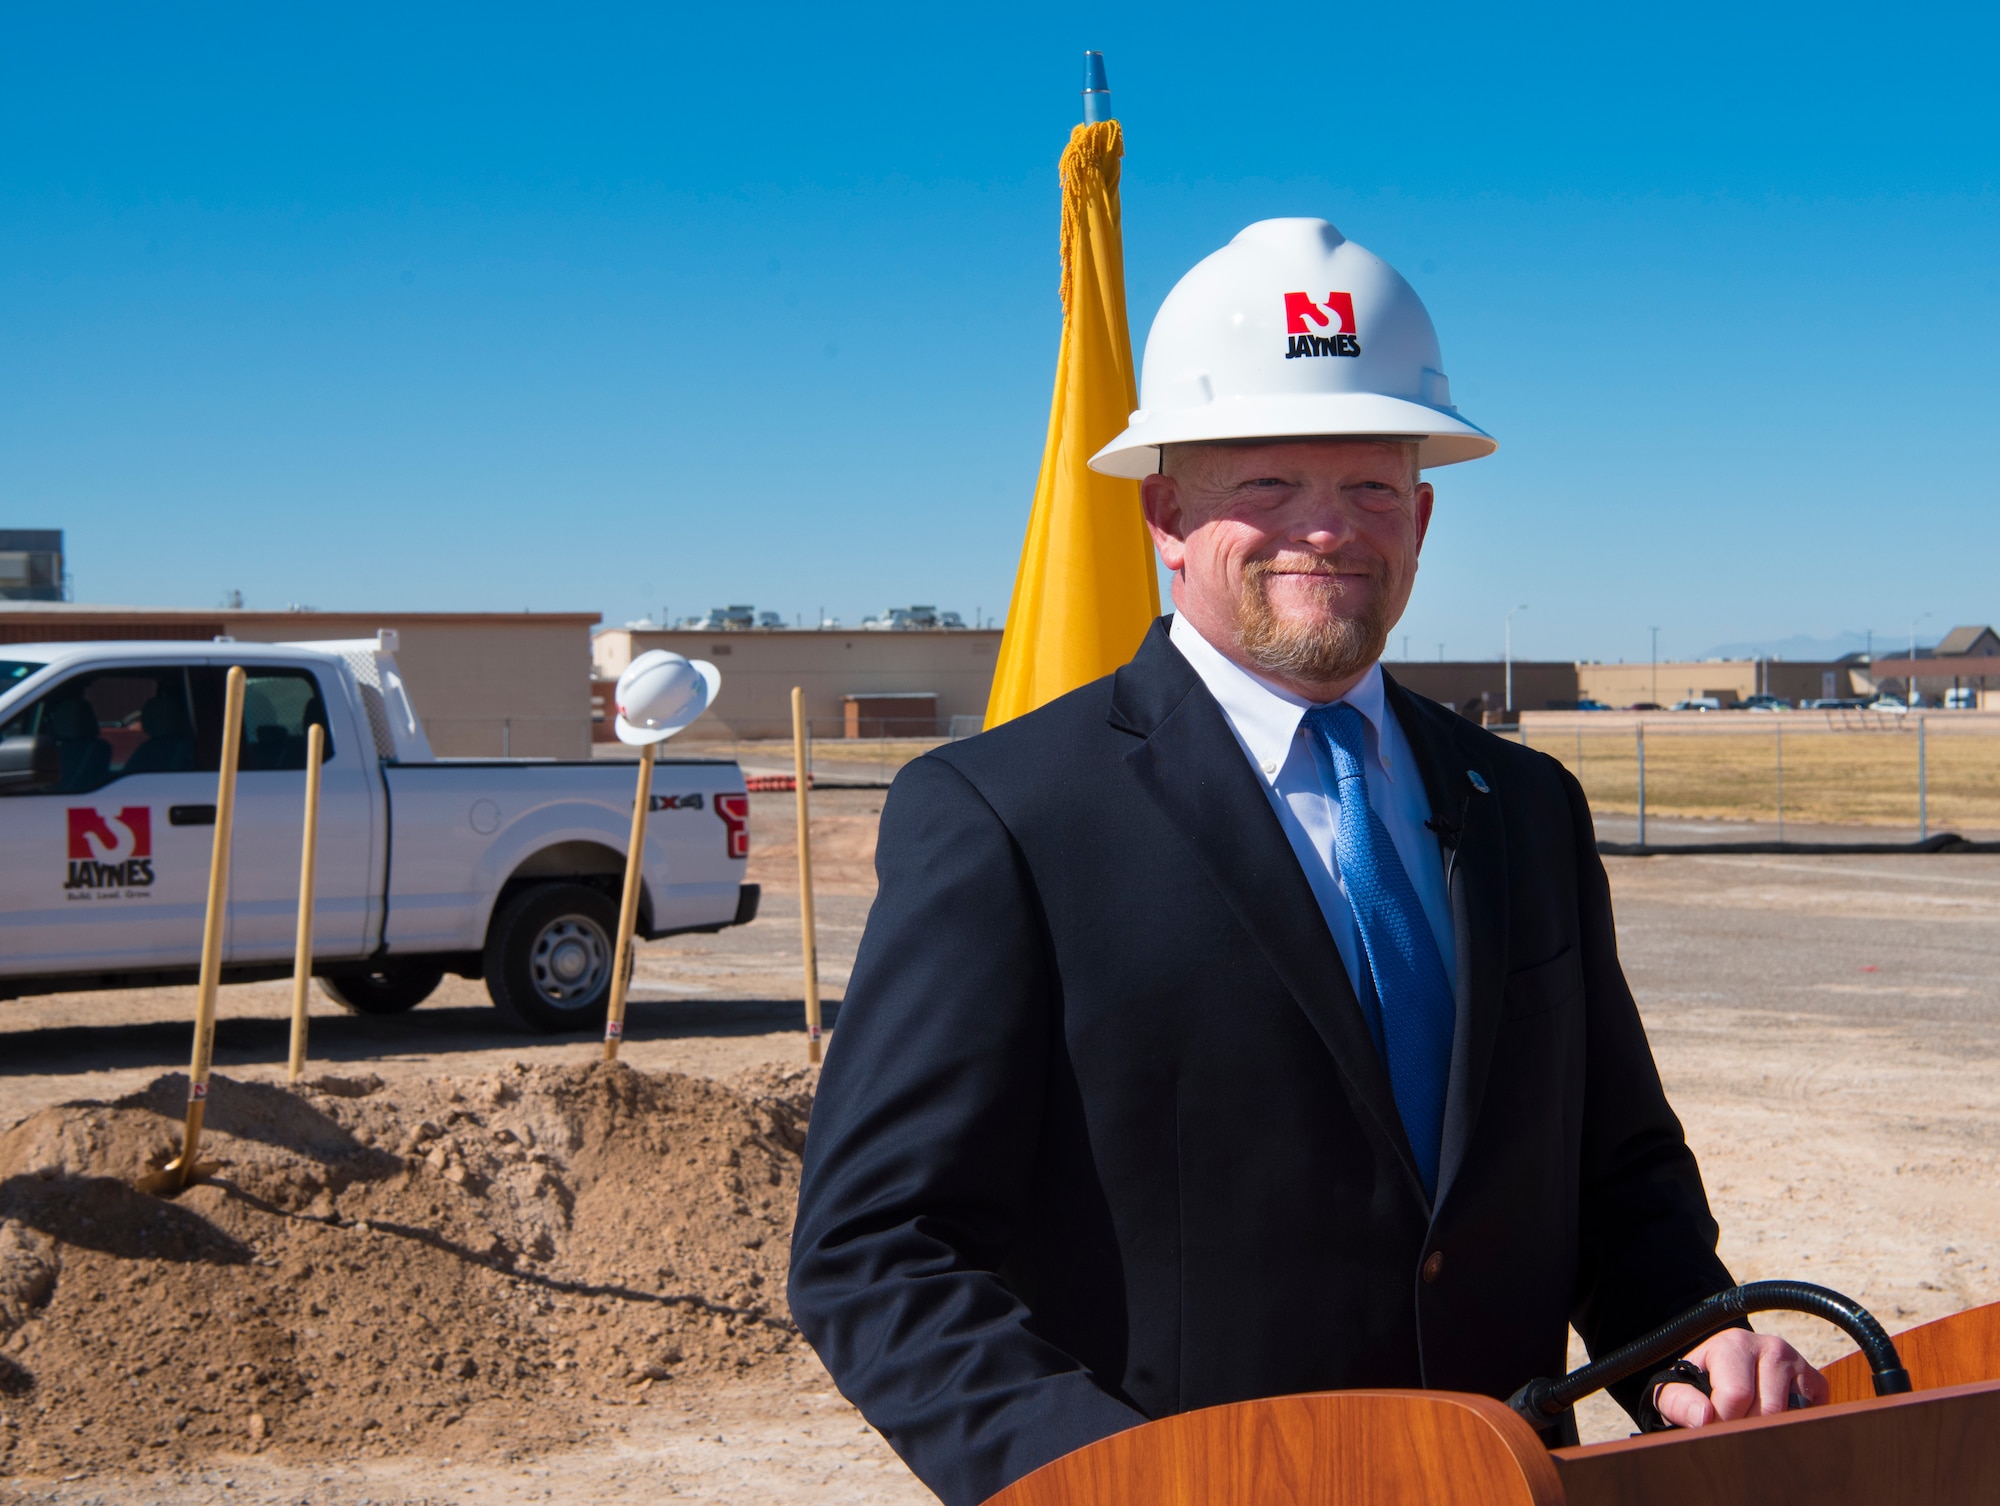 Jerrett Perry, Alamogordo Public School superintendent, gives a speech during a groundbreaking ceremony, Feb. 19, 2021, on Holloman Air Force Base, New Mexico. The new Holloman Elementary school was designed to incorporate flexible and comfortable spaces for diverse learning activities, possibilities for technological growth and new safety and security measures. (U.S. Air Force photo by Airman 1st Class Jessica Sanchez)